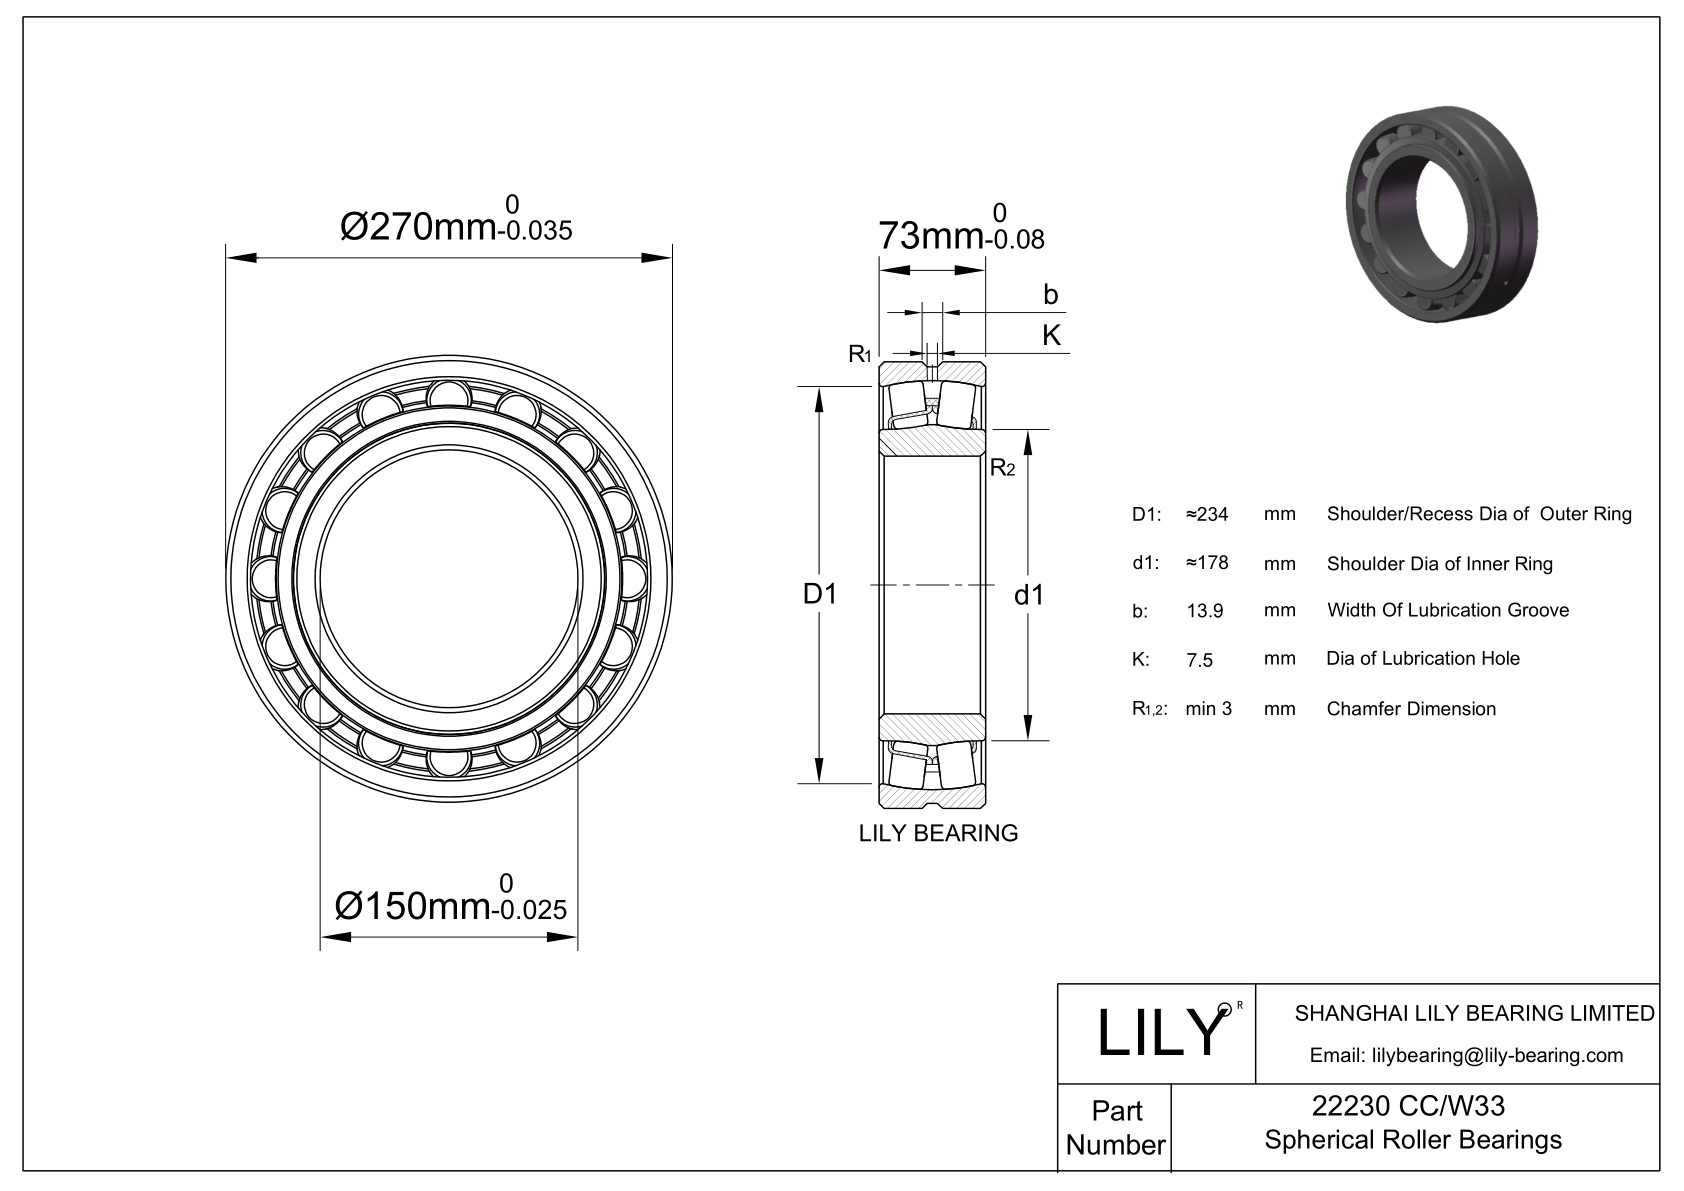 22230 CC/W33 Double Row Spherical Roller Bearing cad drawing